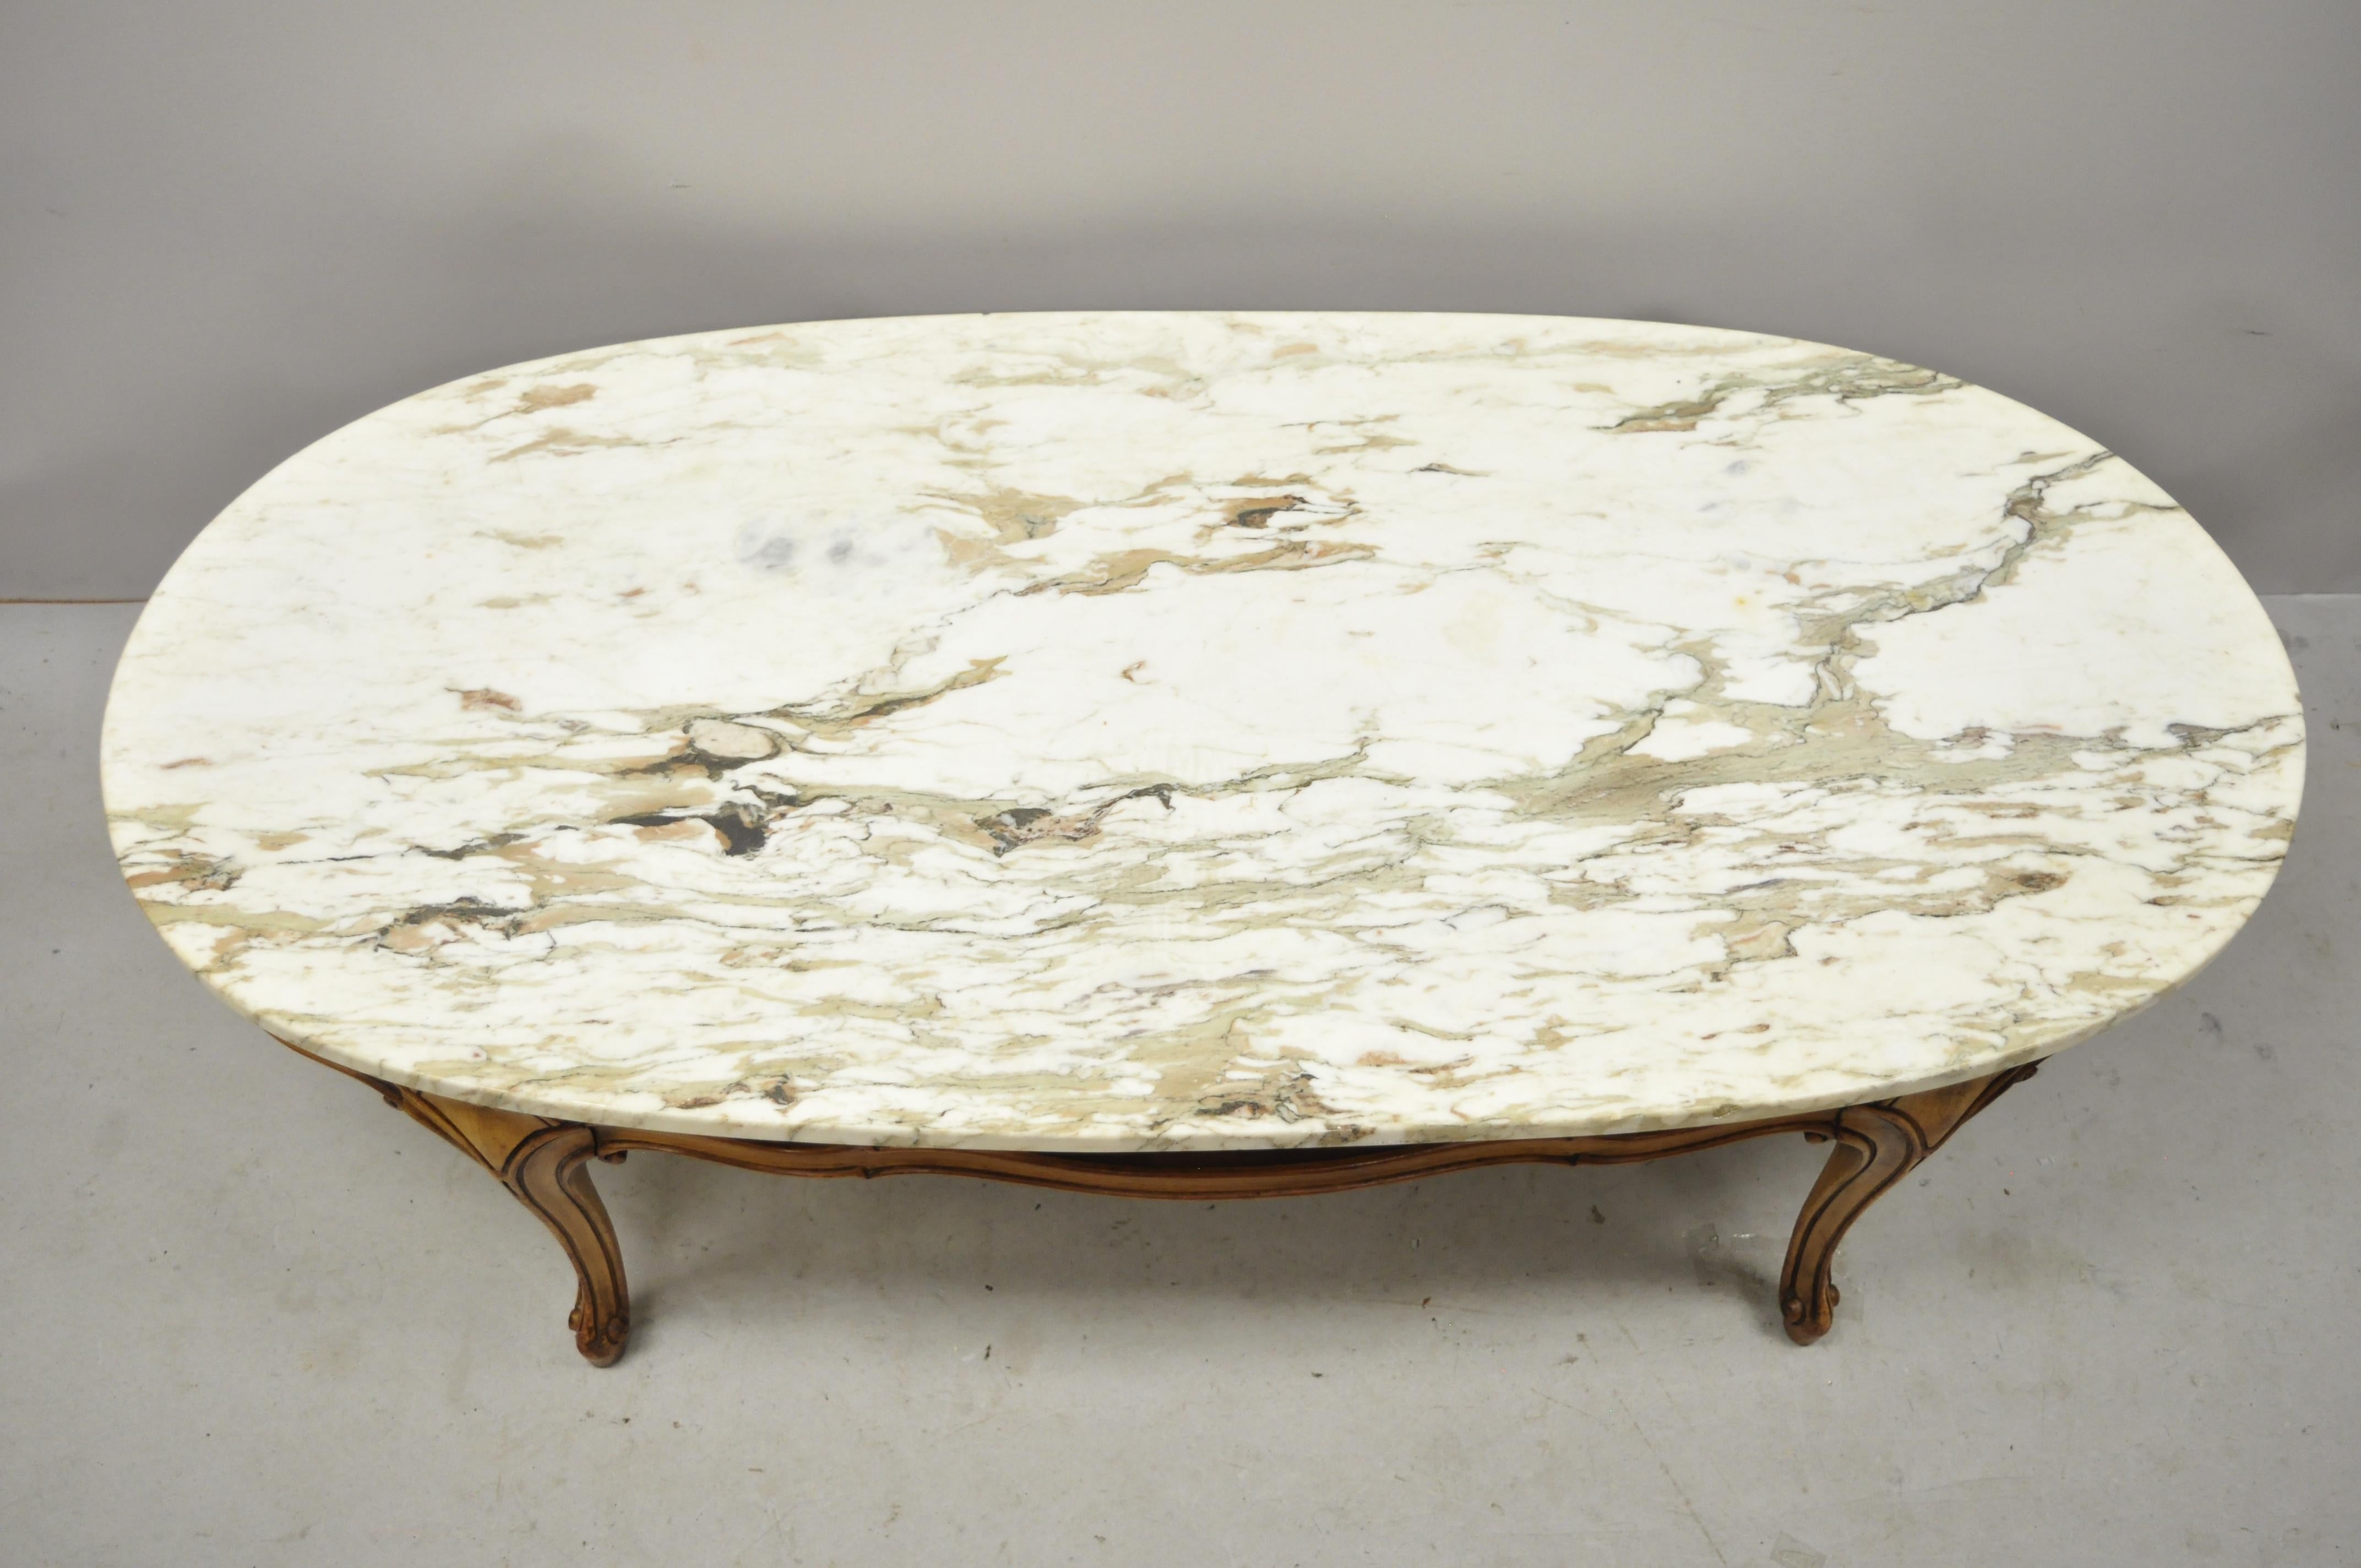 Vintage Italian Provincial French Hollywood Regency ribbon carved oval marble-top coffee table. Item features an oval marble top, solid wood frame, beautiful wood grain, cabriole legs, great style and form, circa mid-20th century.
Measurements: